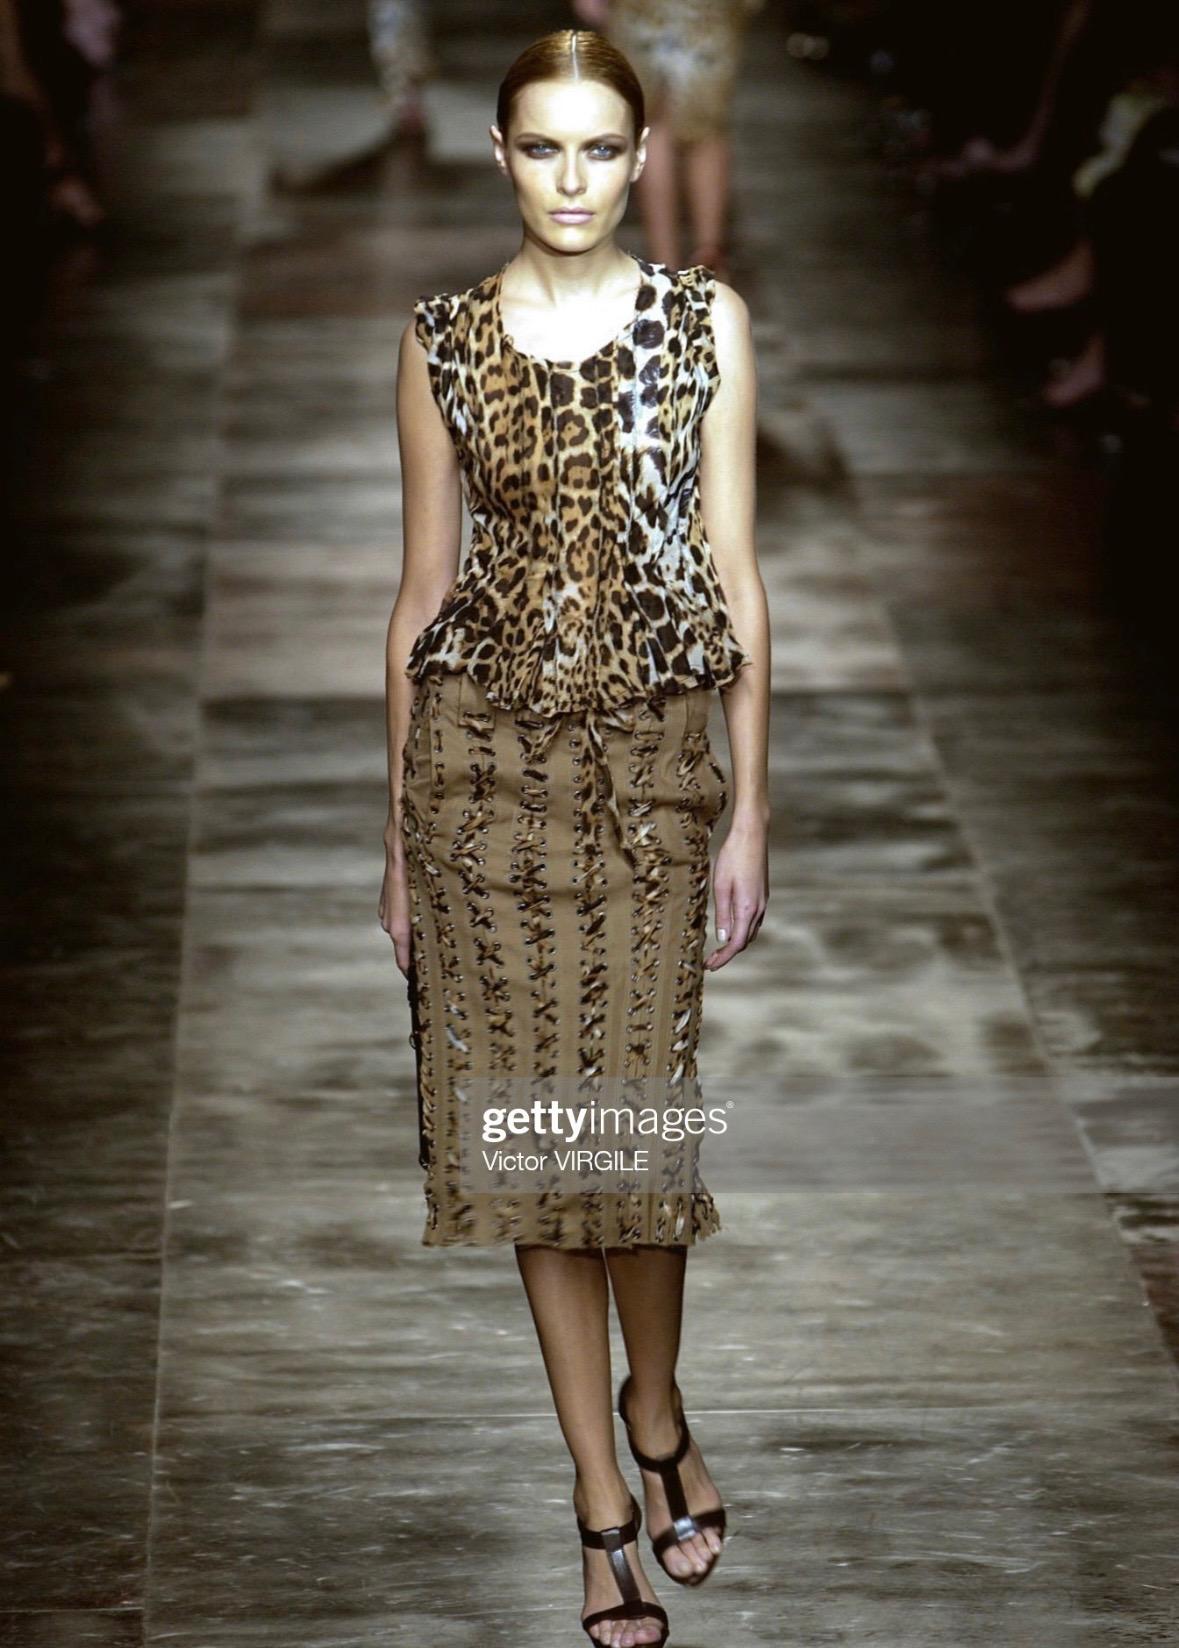 Presenting a chic cheetah print Yves Saint Laurent Rive Gauche short-sleeve top, designed by Tom Ford. From the Spring/Summer 2002 collection, this top features a scoop neckline, oversized sleeves, and a light peplum. Semi-sheer strips of raw edged